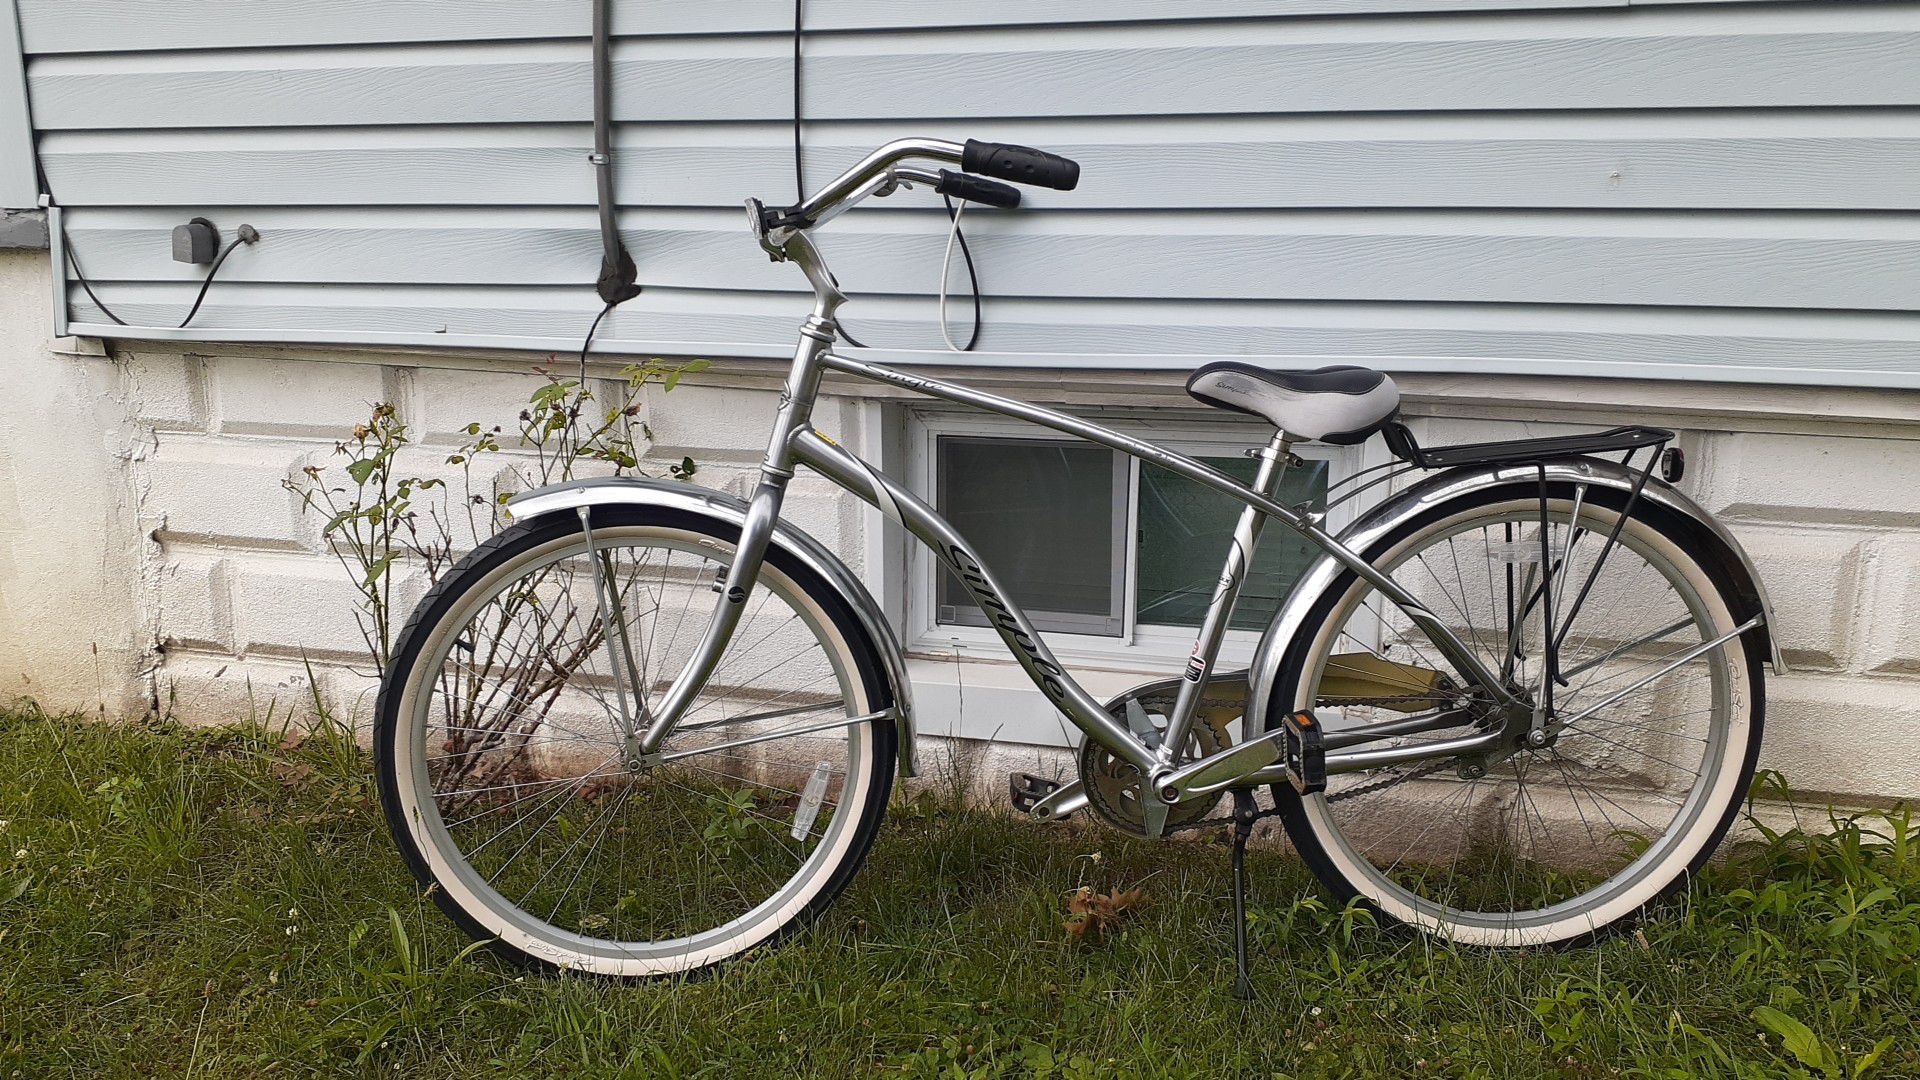 1 beach cruiser simple Giant and one mountain woman's bike route Rubicon Giant mountain bike both in good condition